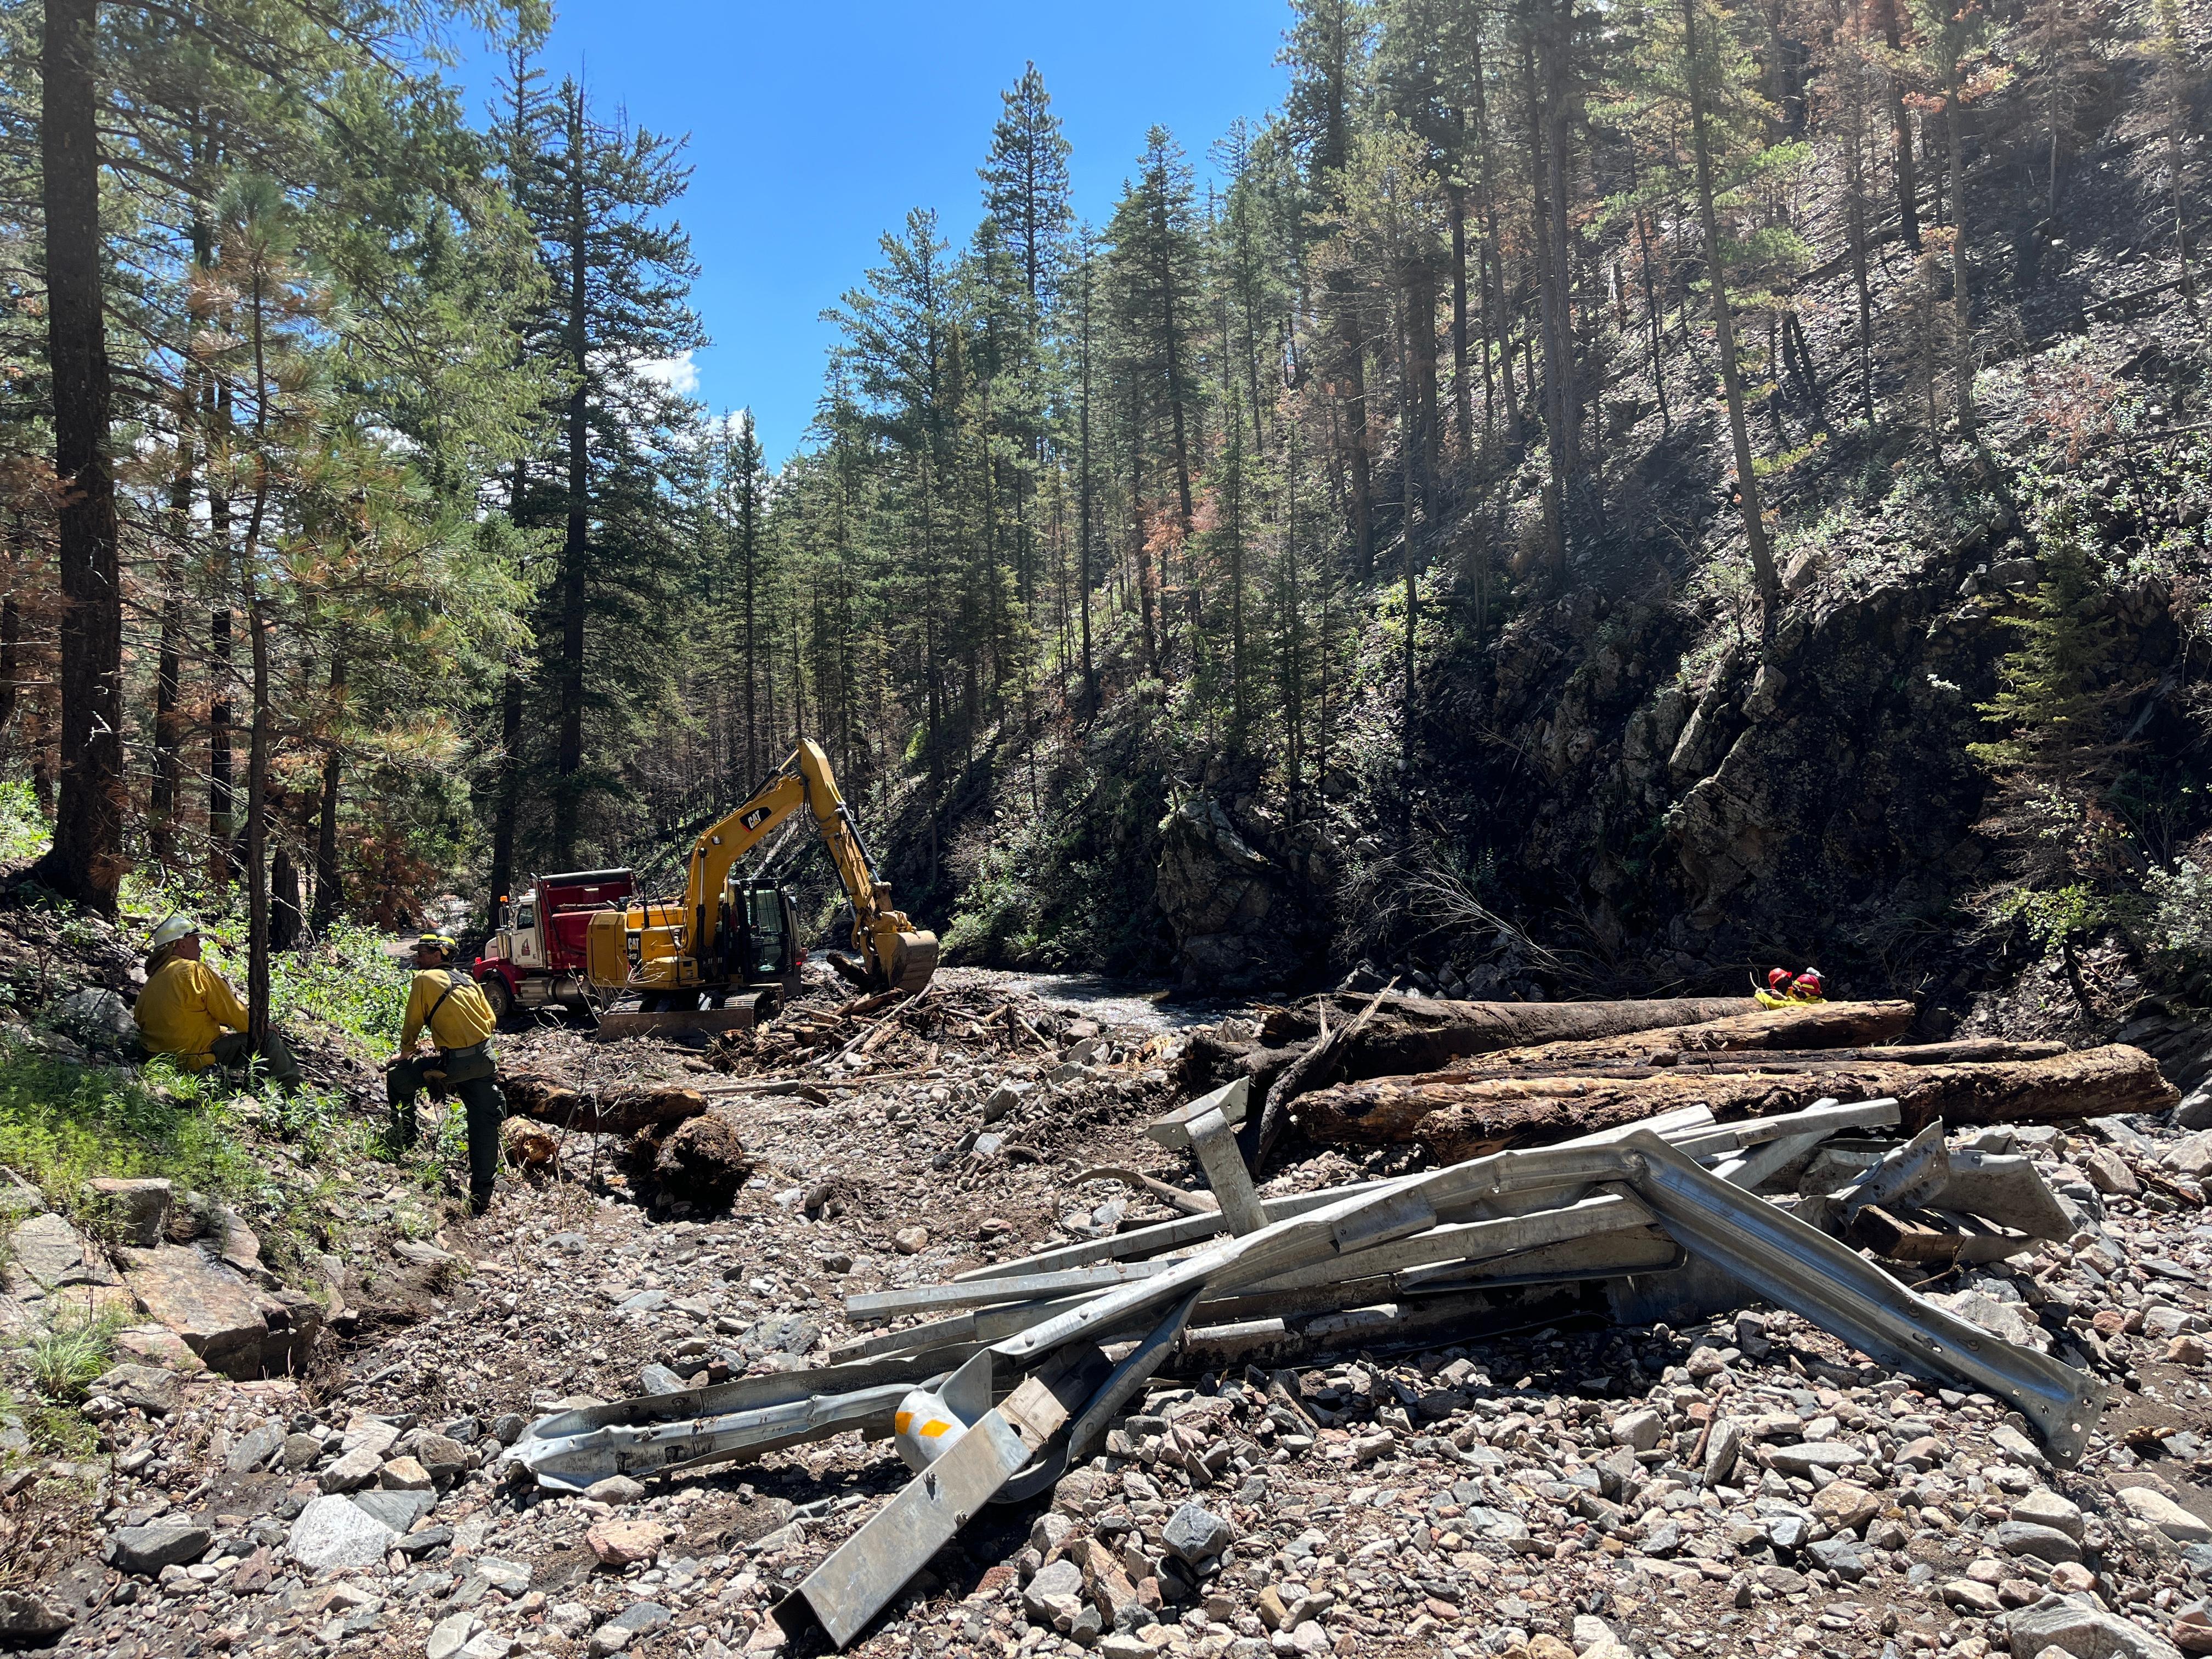 Image of flood debris piles of guardrails, rocks and logs being scooped up by an excavator on a road in the narrow bottom of canyon. Firefighters in safety gear are observing from a distance.